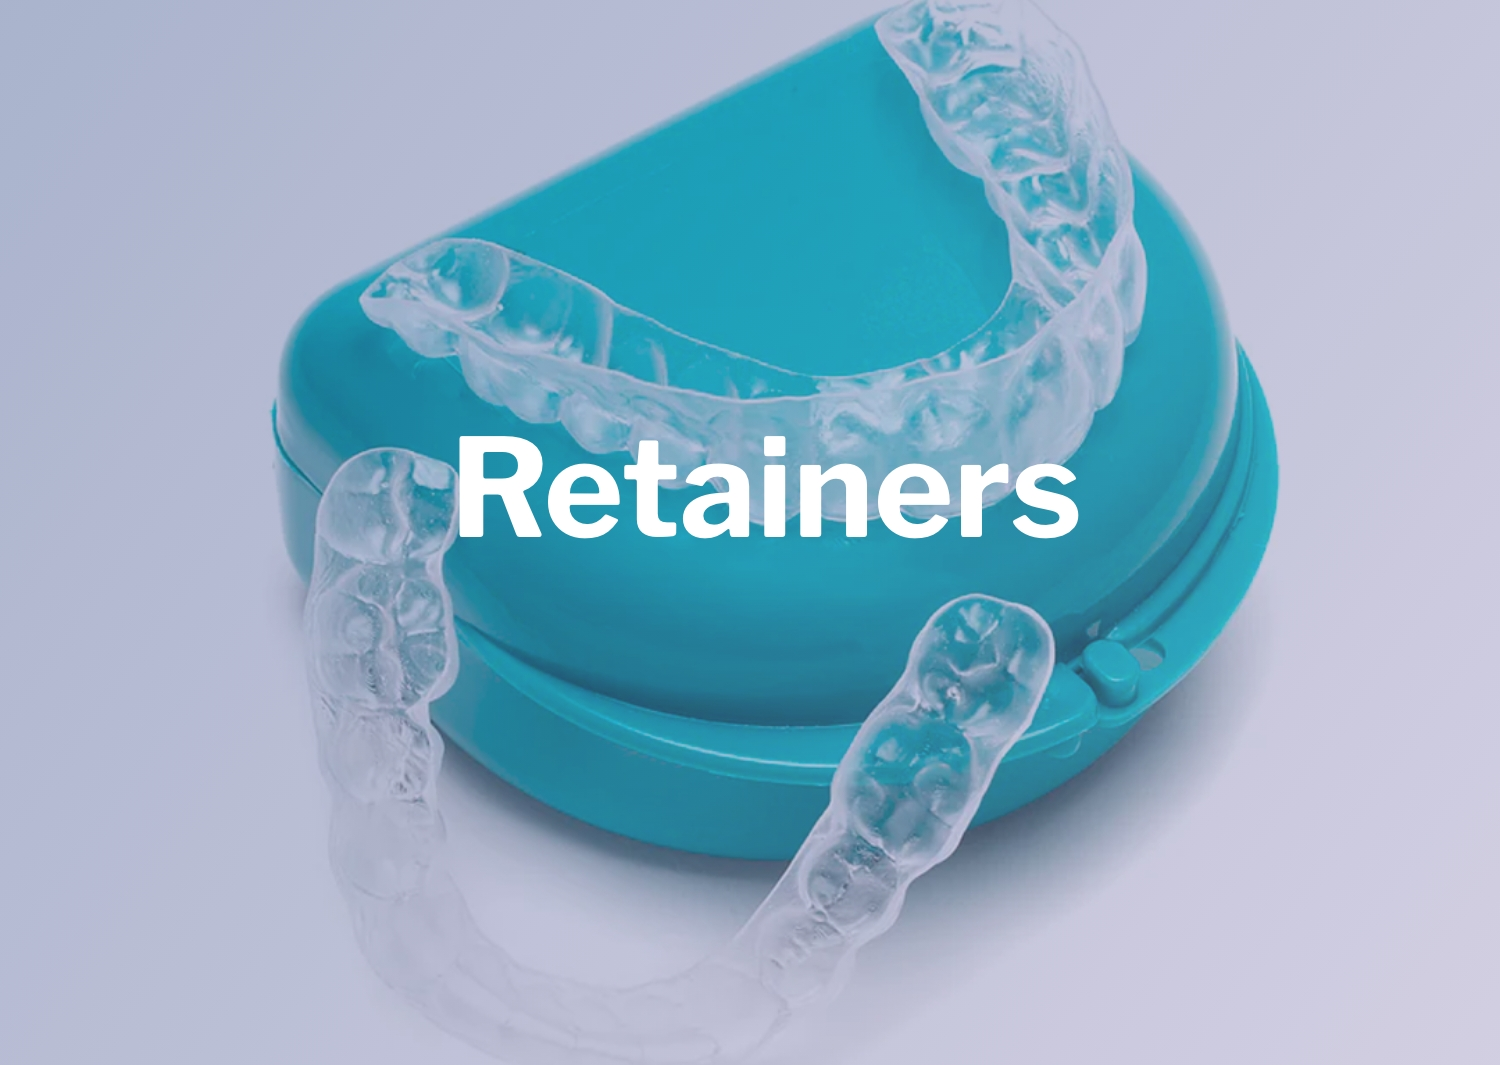 All Retainers